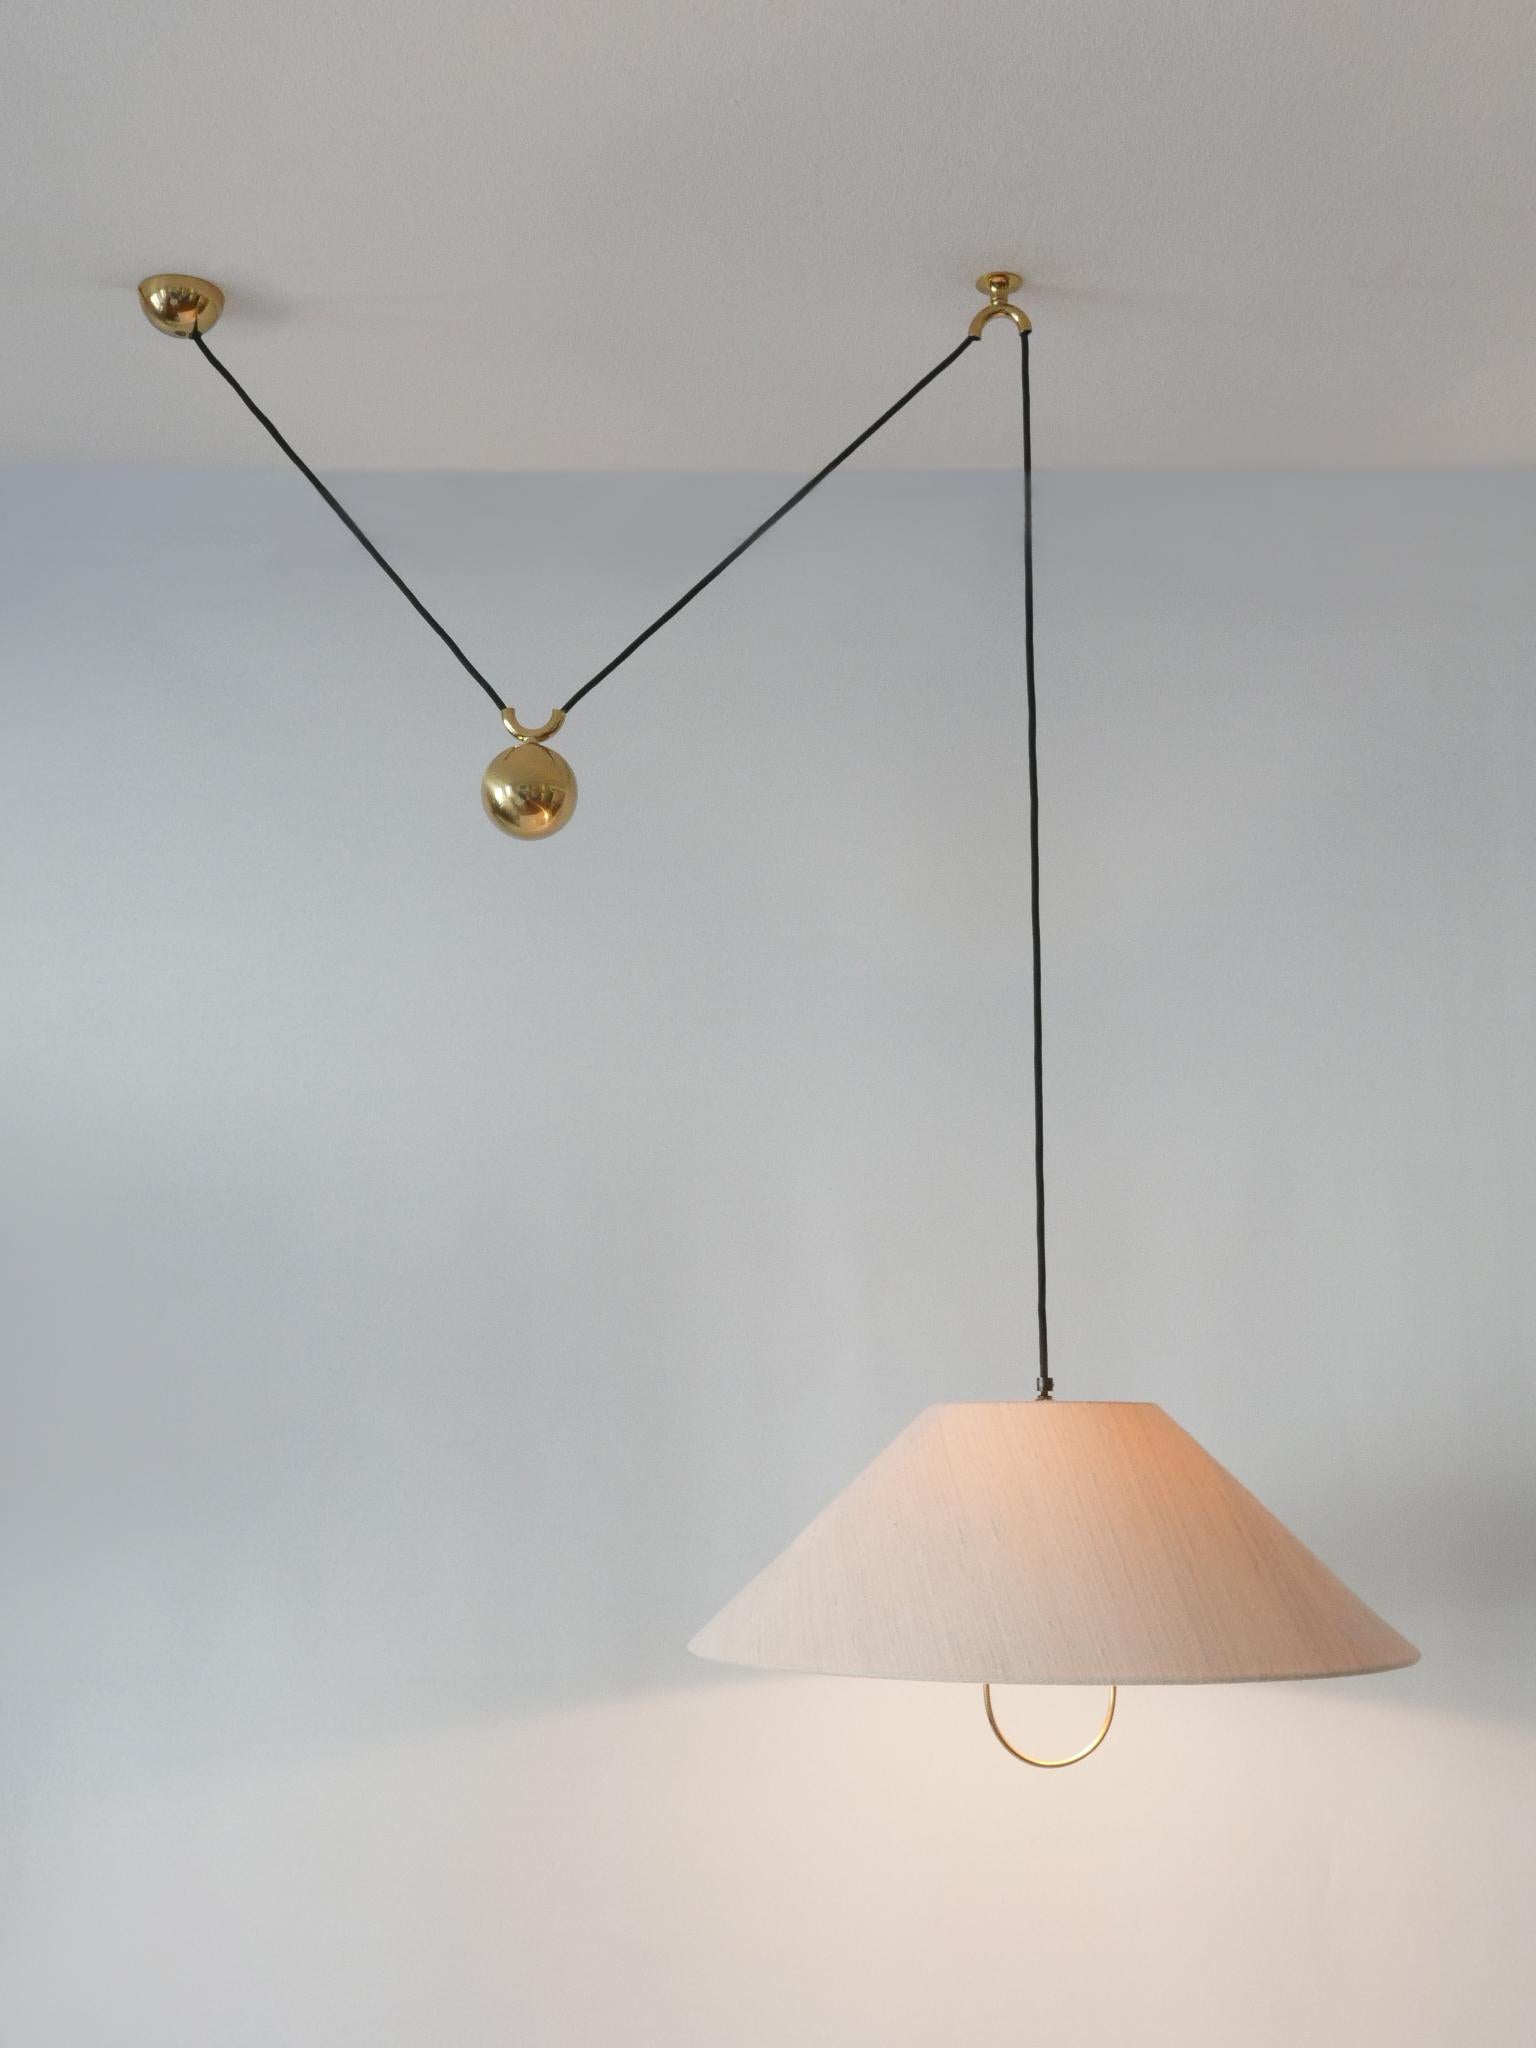 Extremely rare and early counterweight pendant lamp or hanging light. Designed and manufactured by Florian Schulz, Germany, 1960s.

Executed in brass and fabric, the lamp comes with 1 x E27 / E26 Edison screw fit bulb holder, is wired and in working